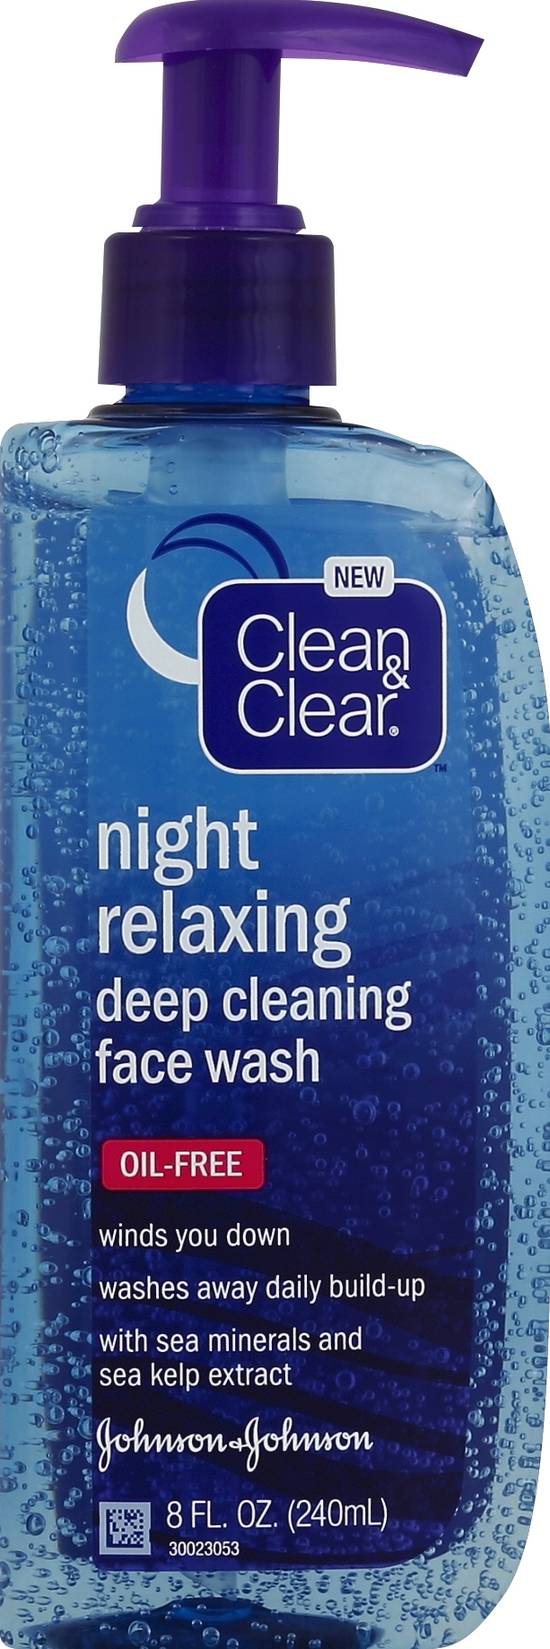 Clean & Clear Night Relaxing Oil-Free Deep Cleansing Face Wash (8 oz)